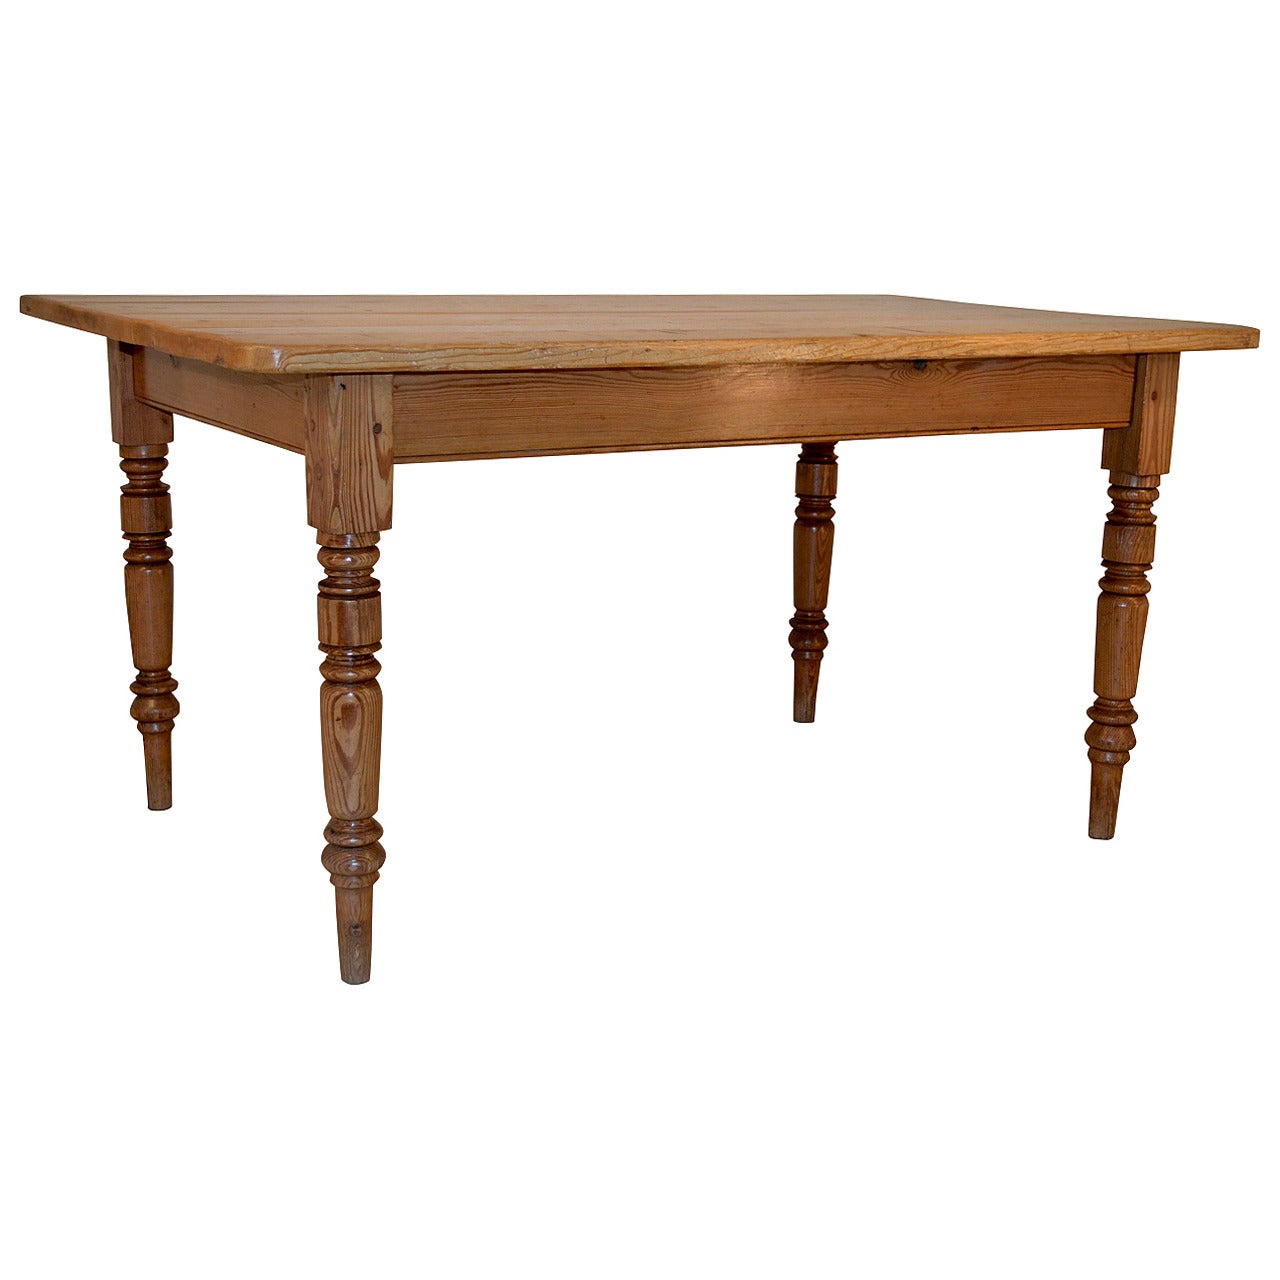 c.1860 English Pitch Pine Table